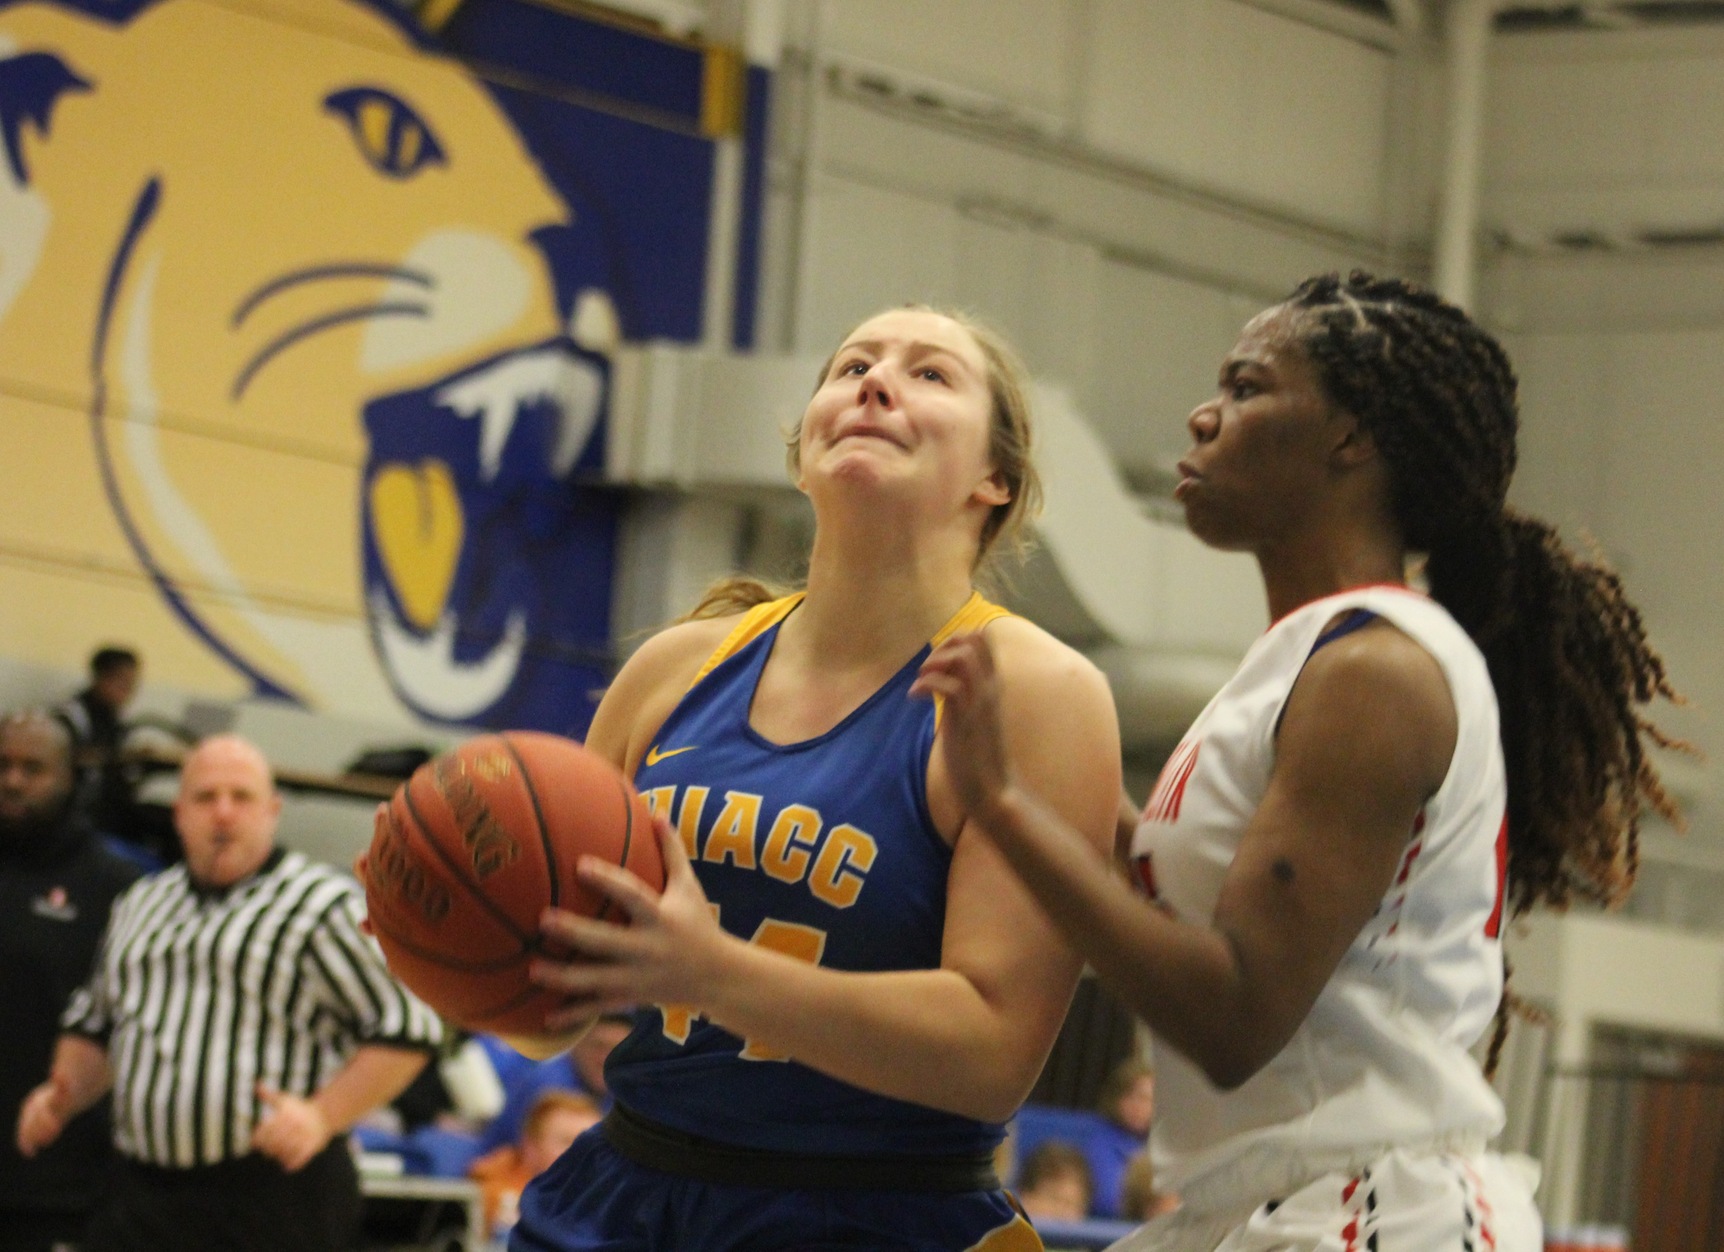 NIACC's Sydney Wetlaufer converts a layup in the first half of Monday's game against Sinclair CC.